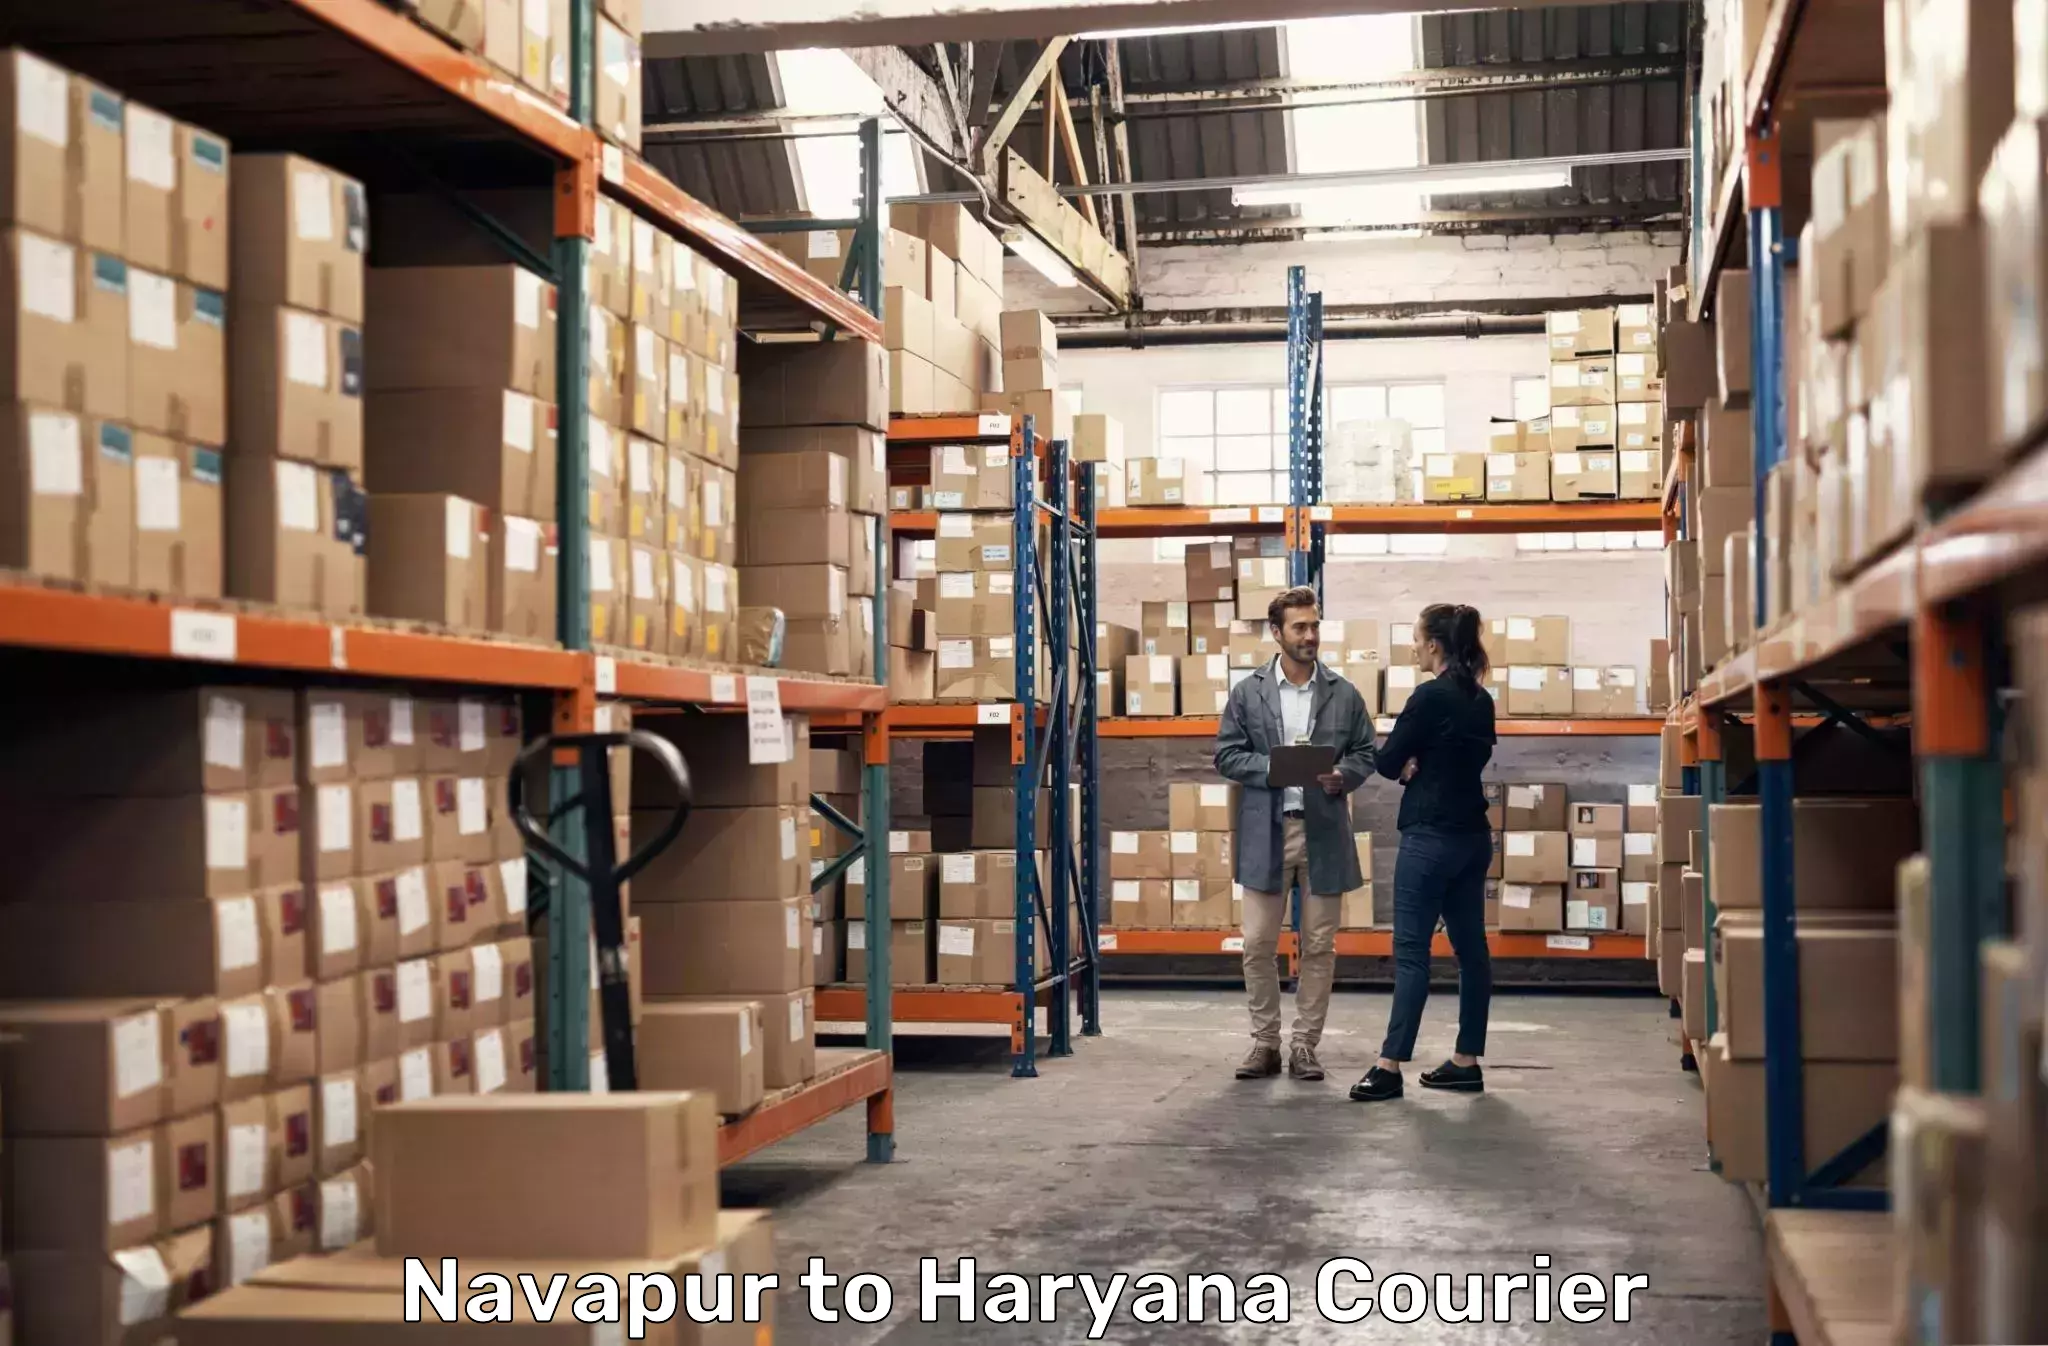 Urgent courier needs in Navapur to Chaudhary Charan Singh Haryana Agricultural University Hisar